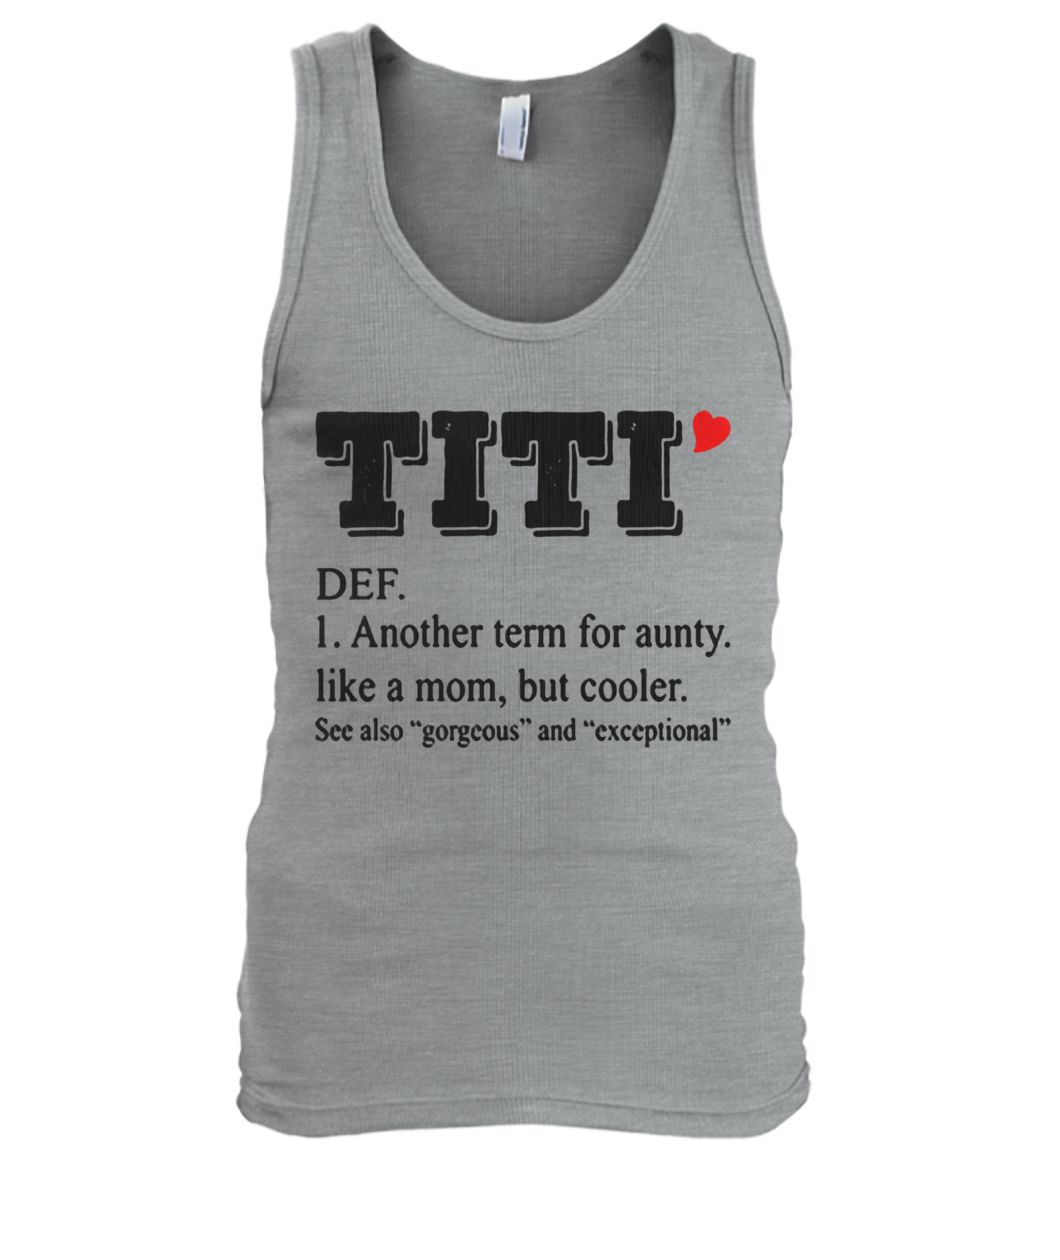 Titi def another term for aunty like a mom but cooler men's tank top